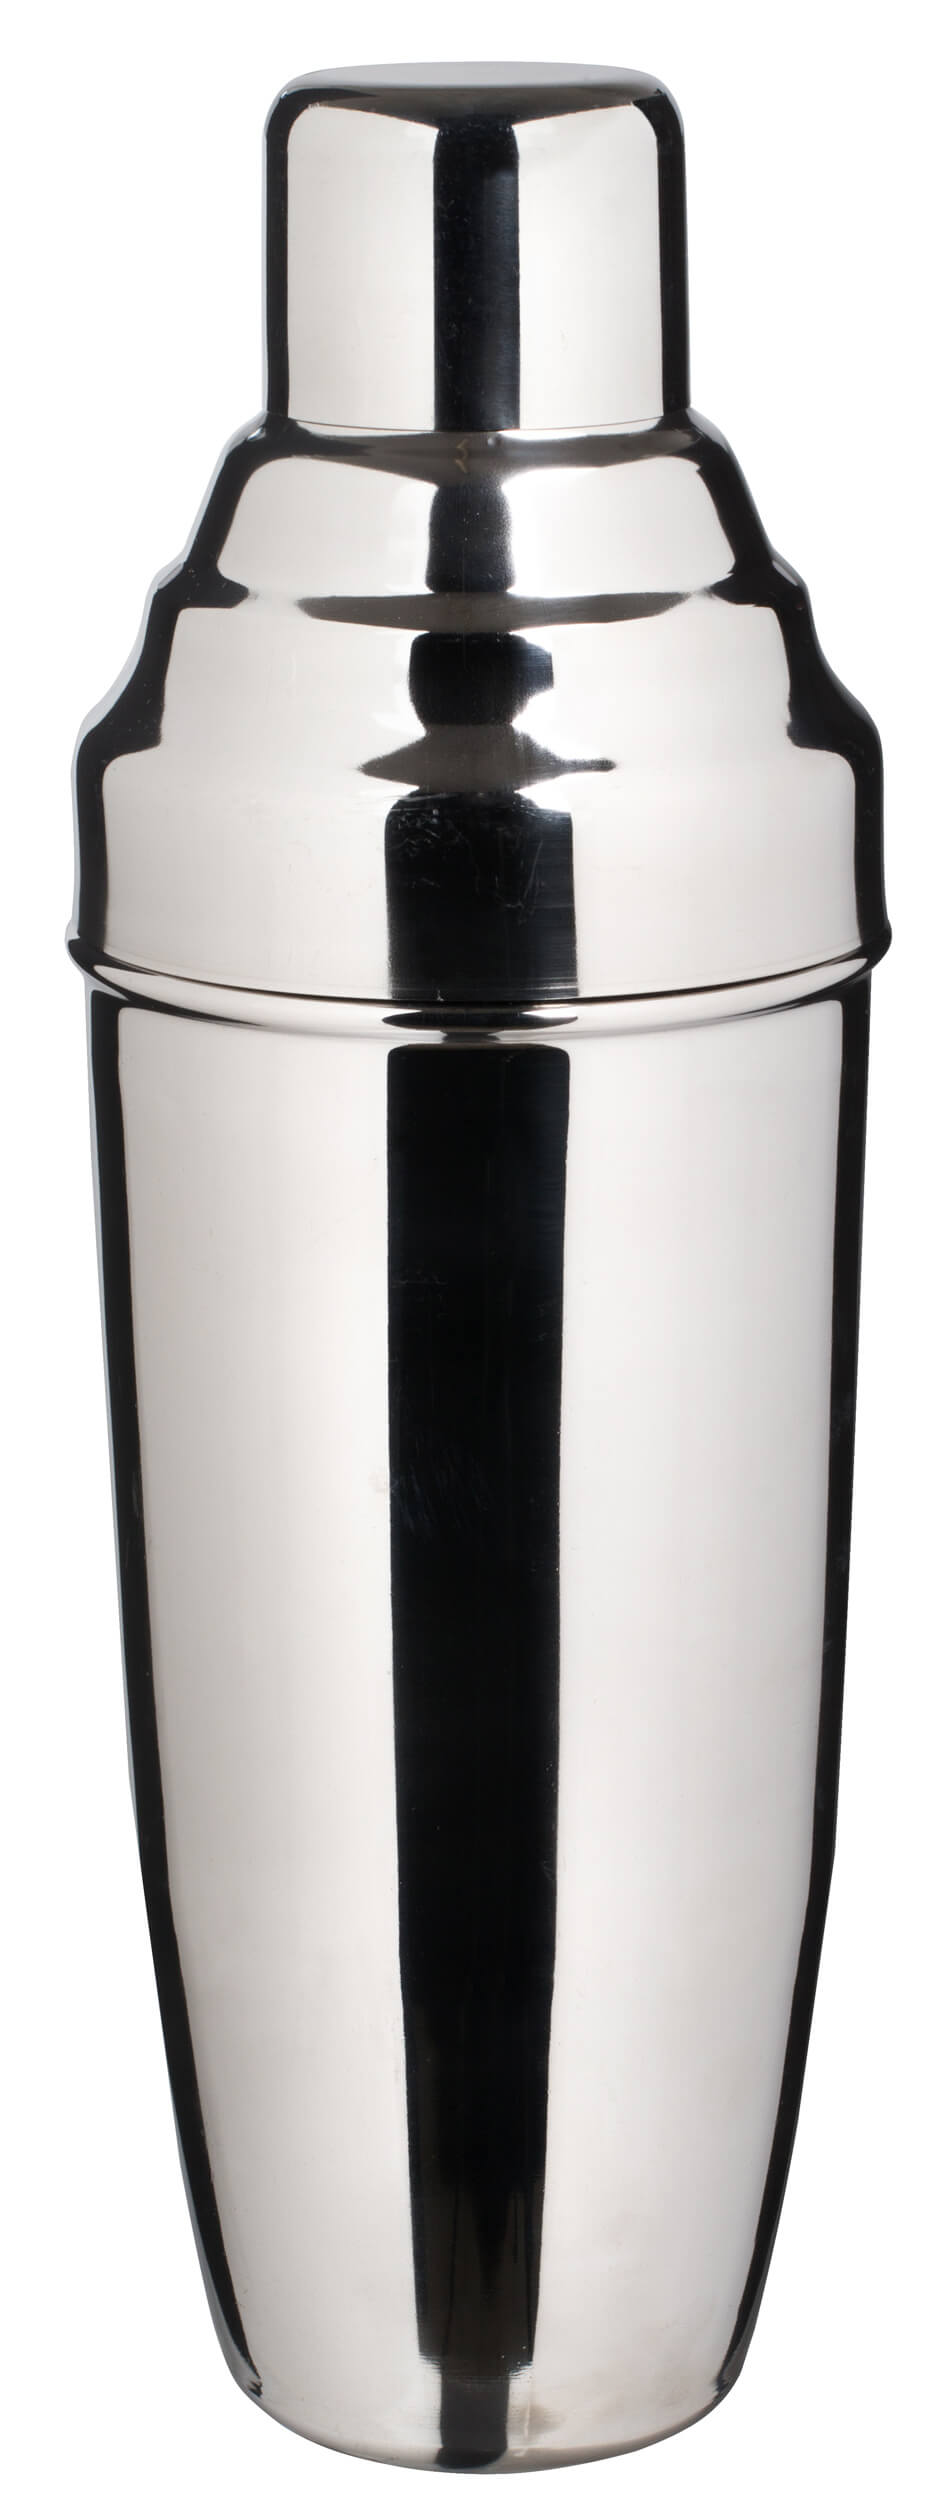 Cocktail shaker, stainless steel, tripartite, polished - 2000ml